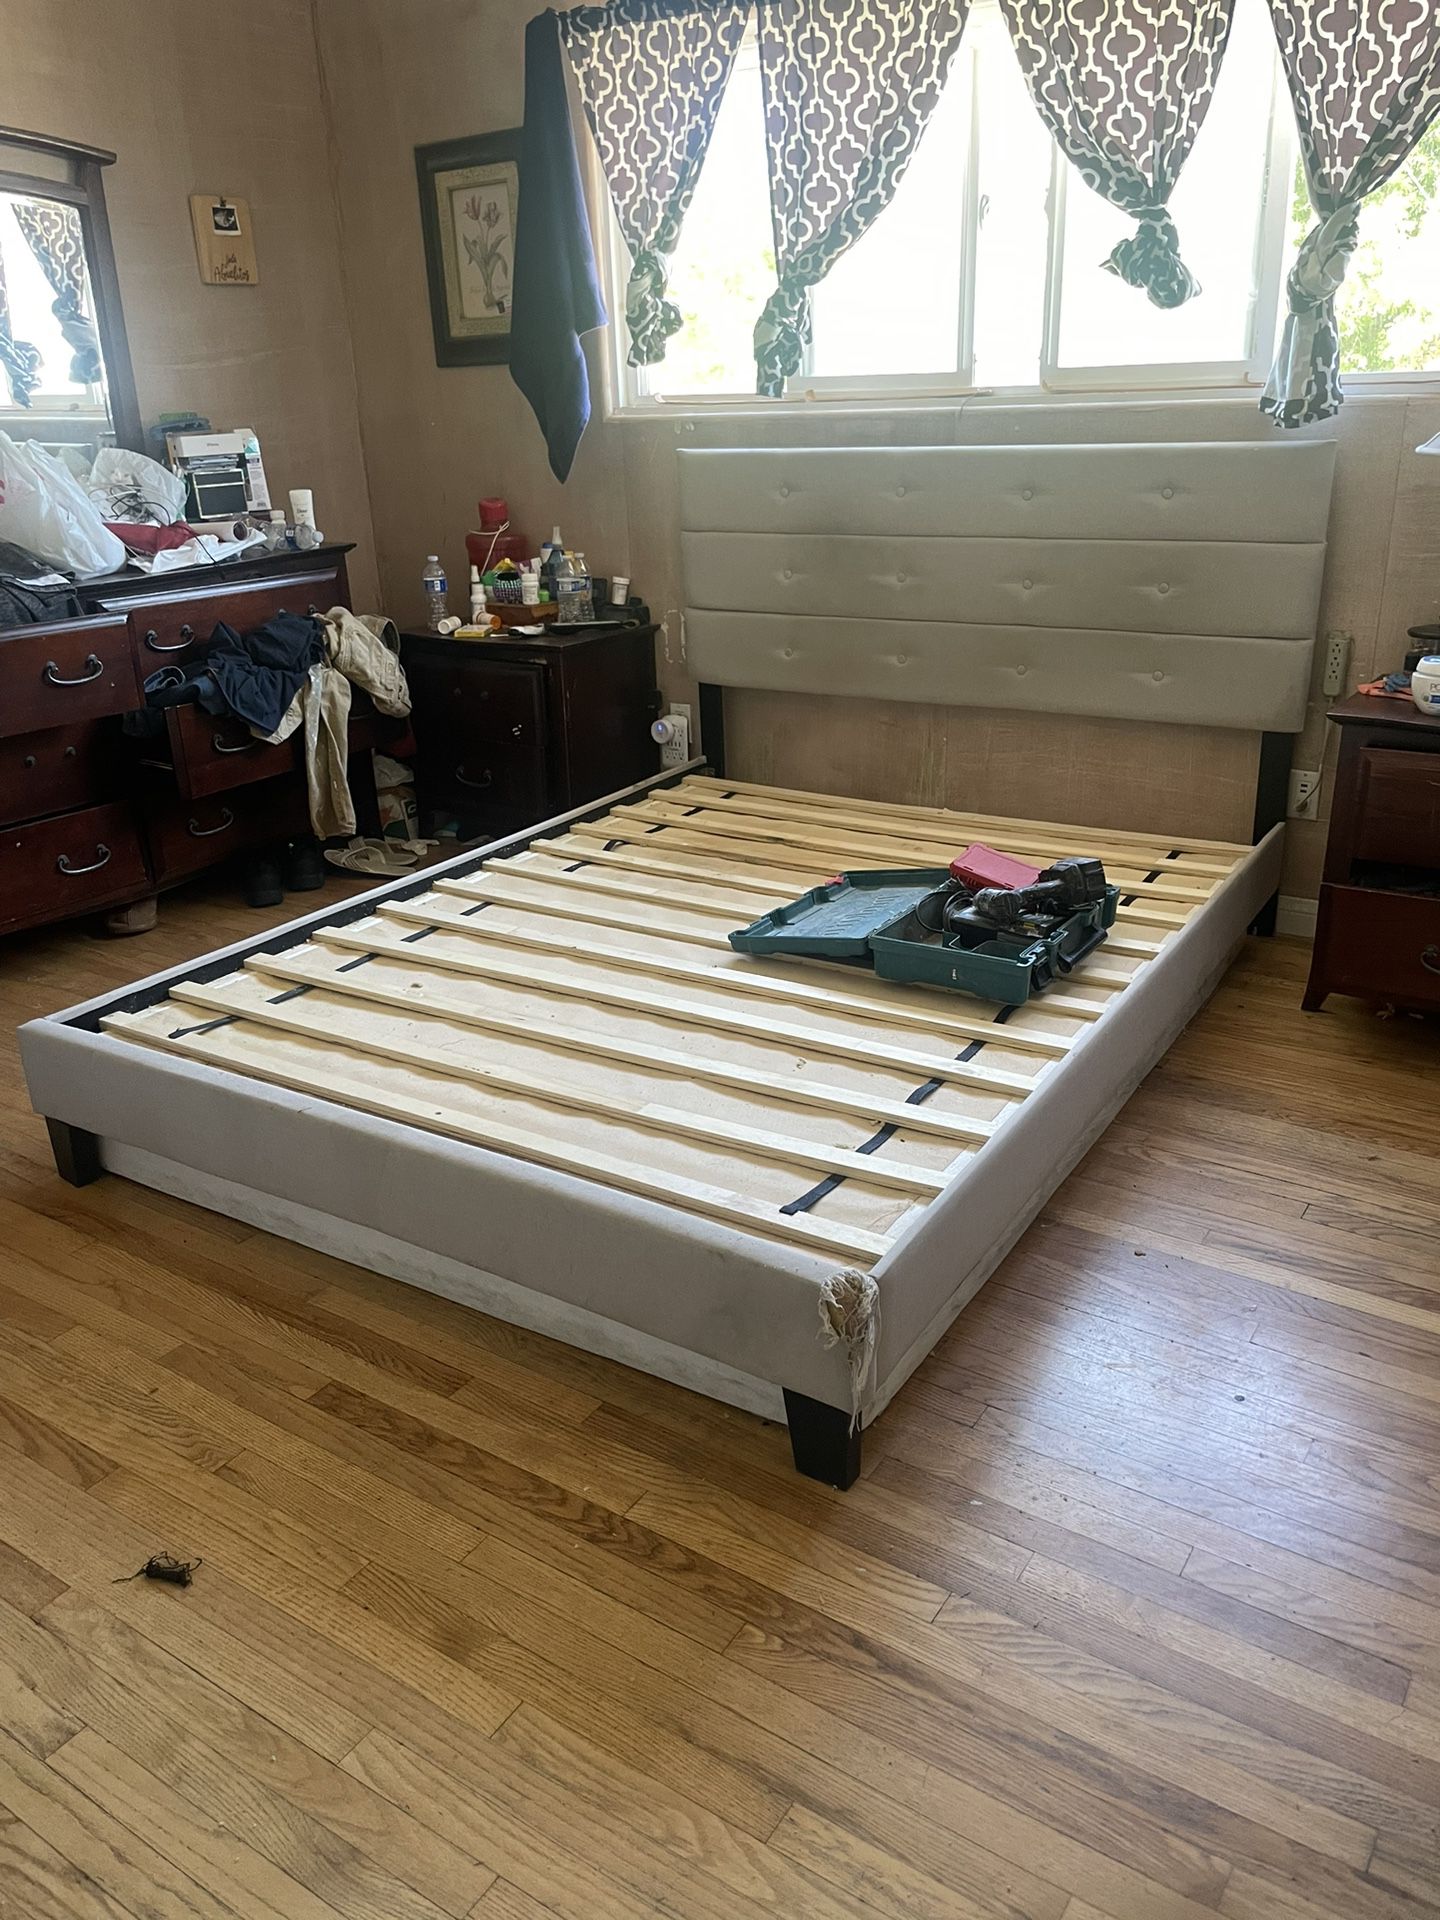 Free Queen Size Bed 